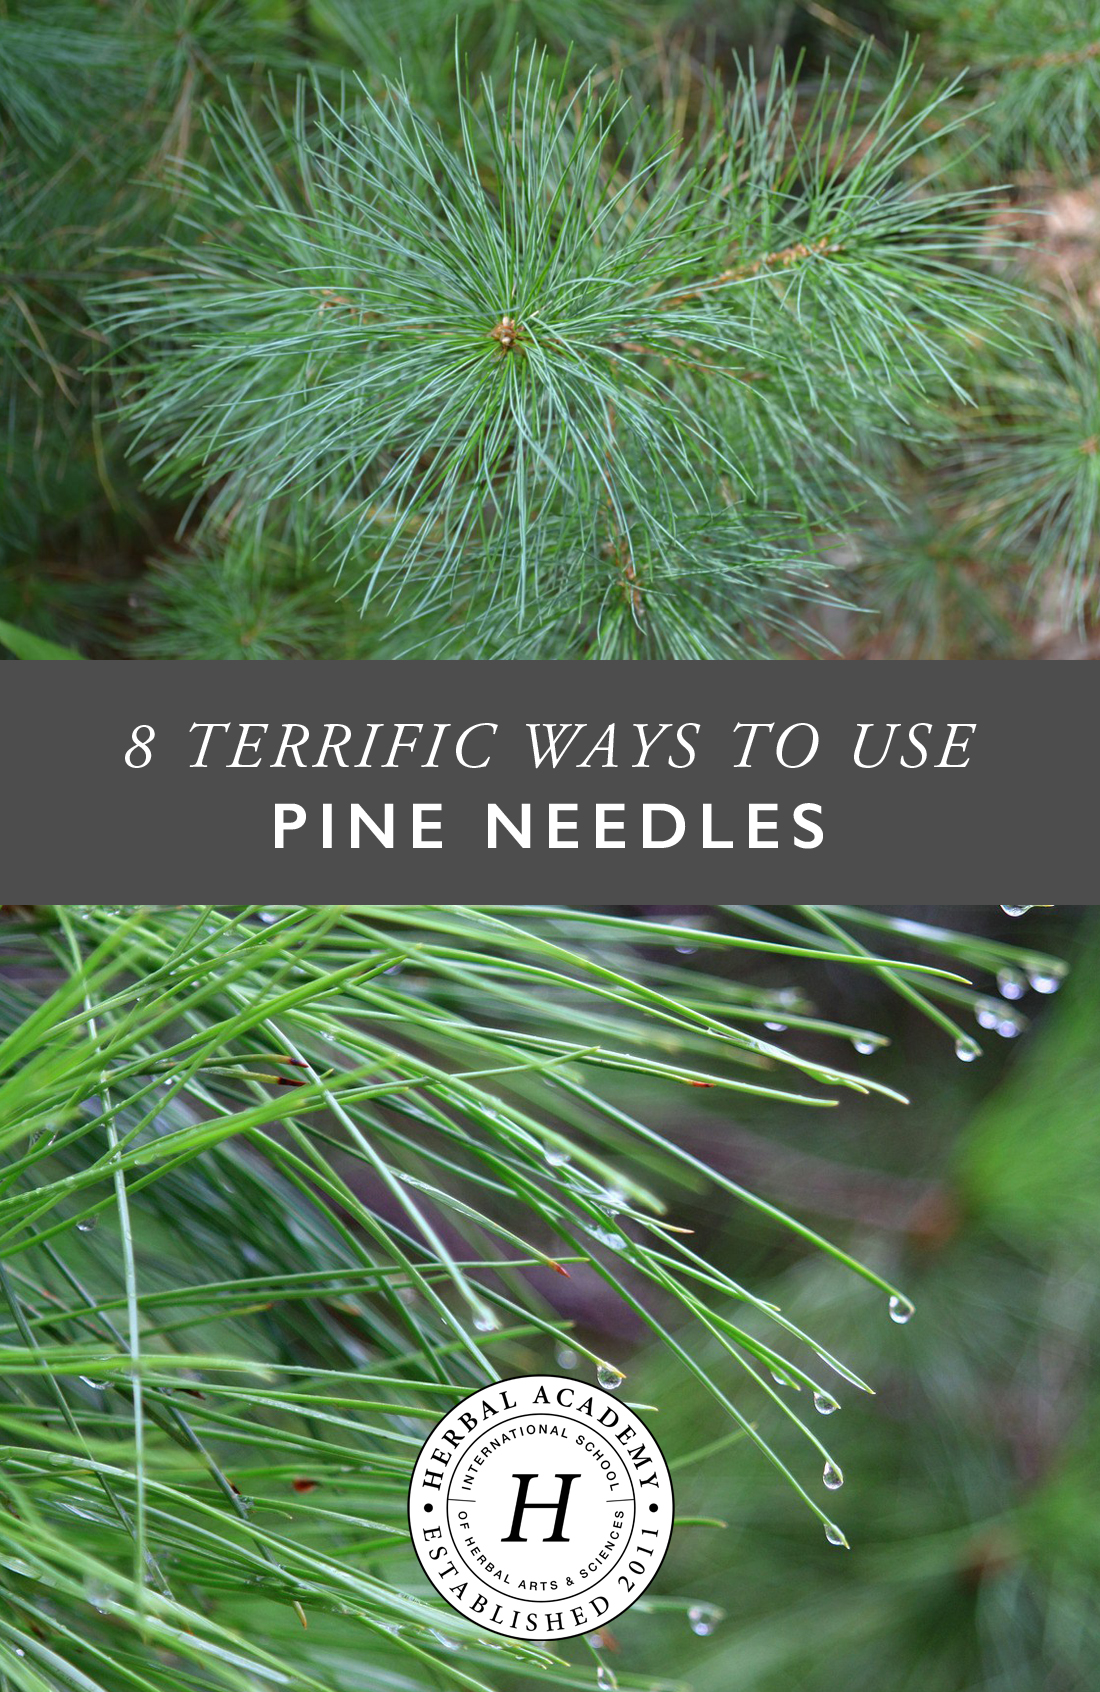 8 Terrific Ways to Use Pine Needles - by Herbal Academy